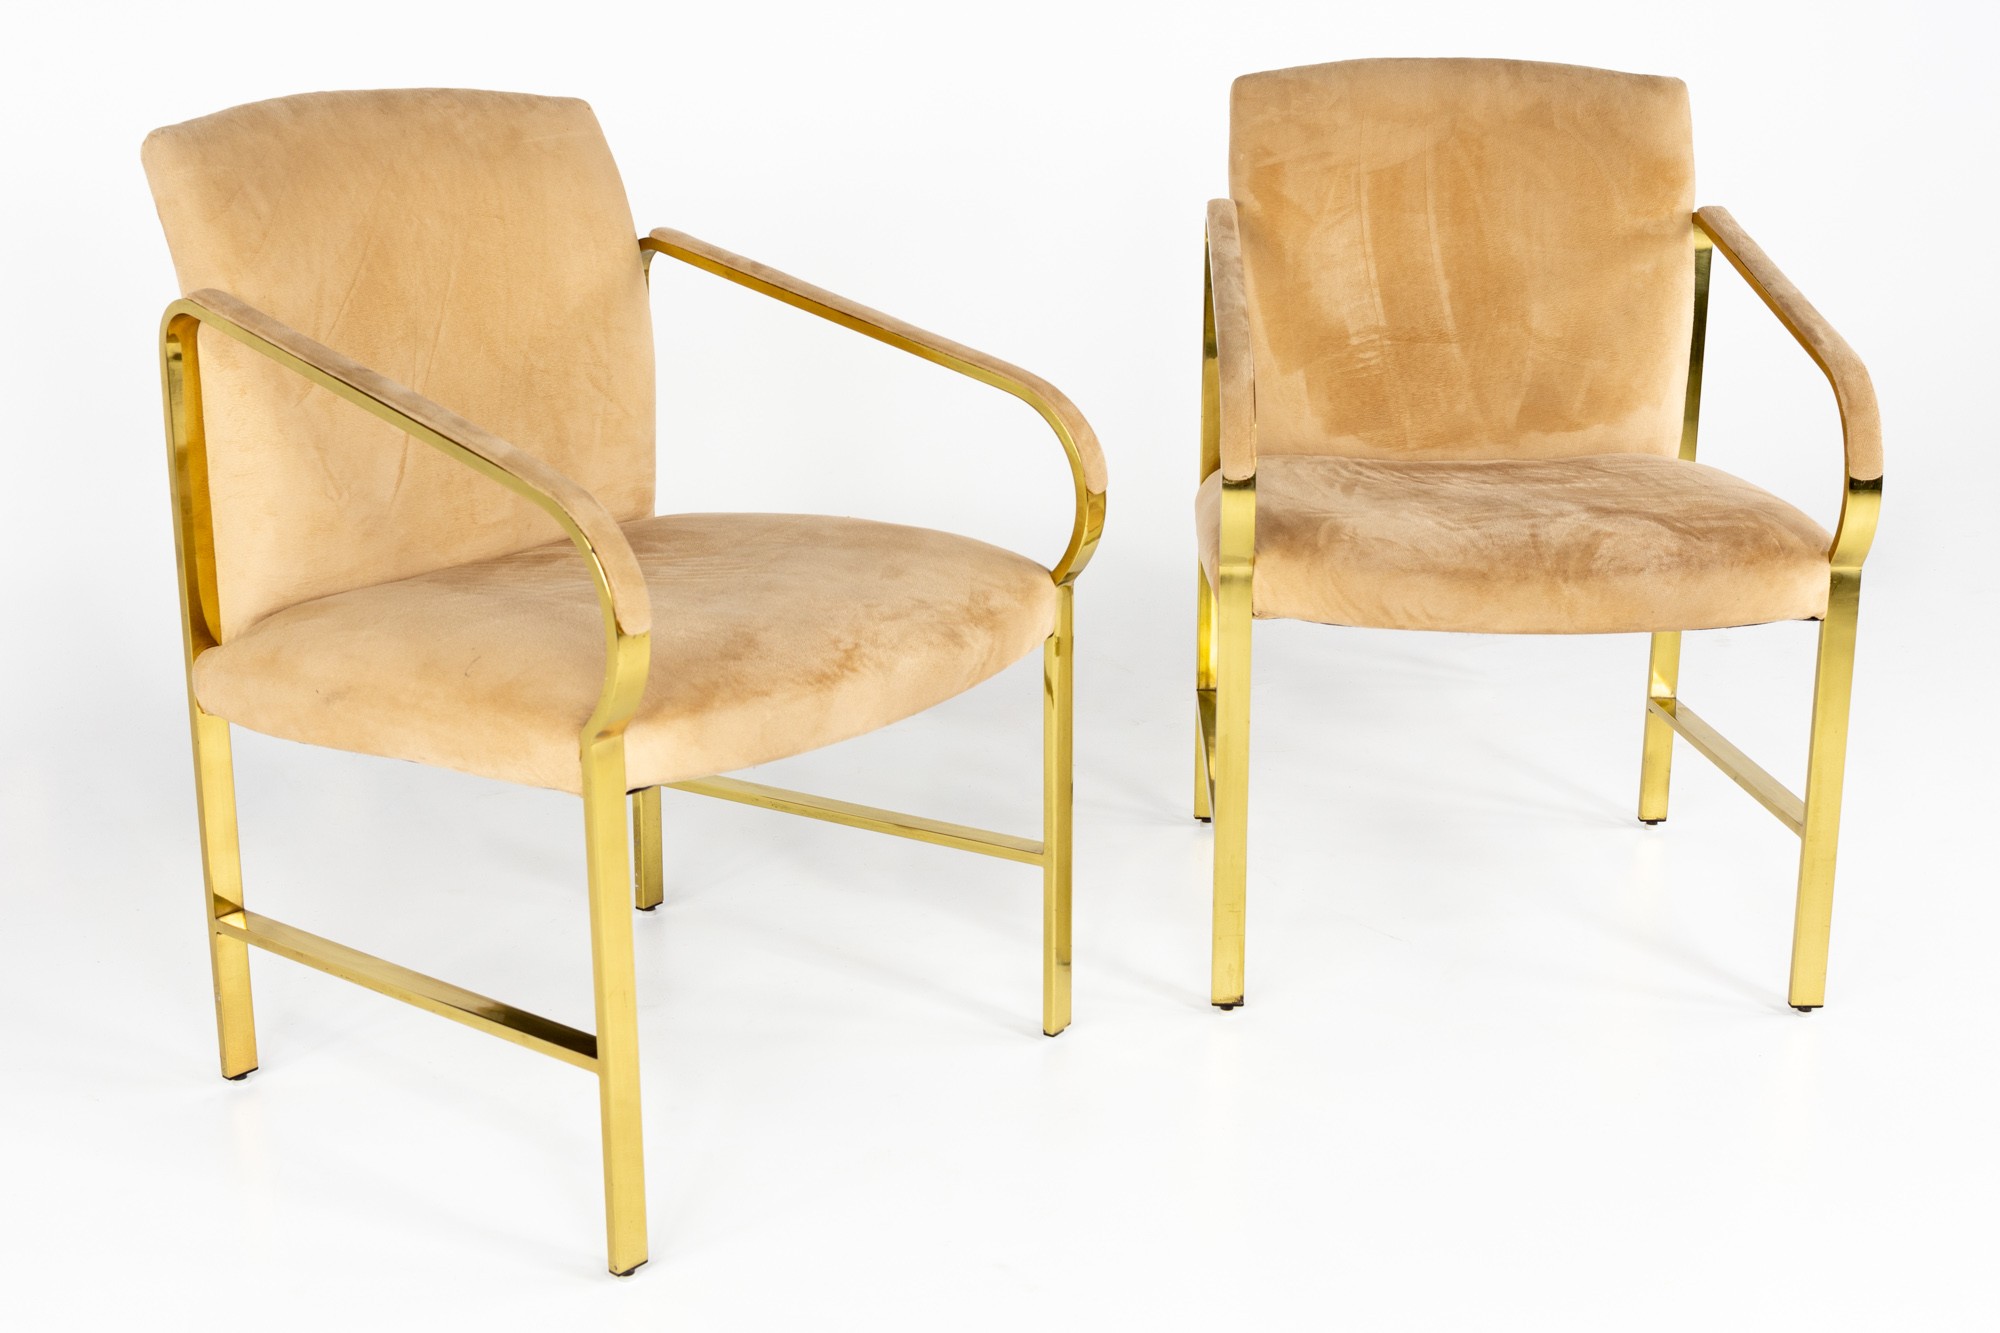 Baker Furniture Mid Century Brass Arm Chairs - a Pair